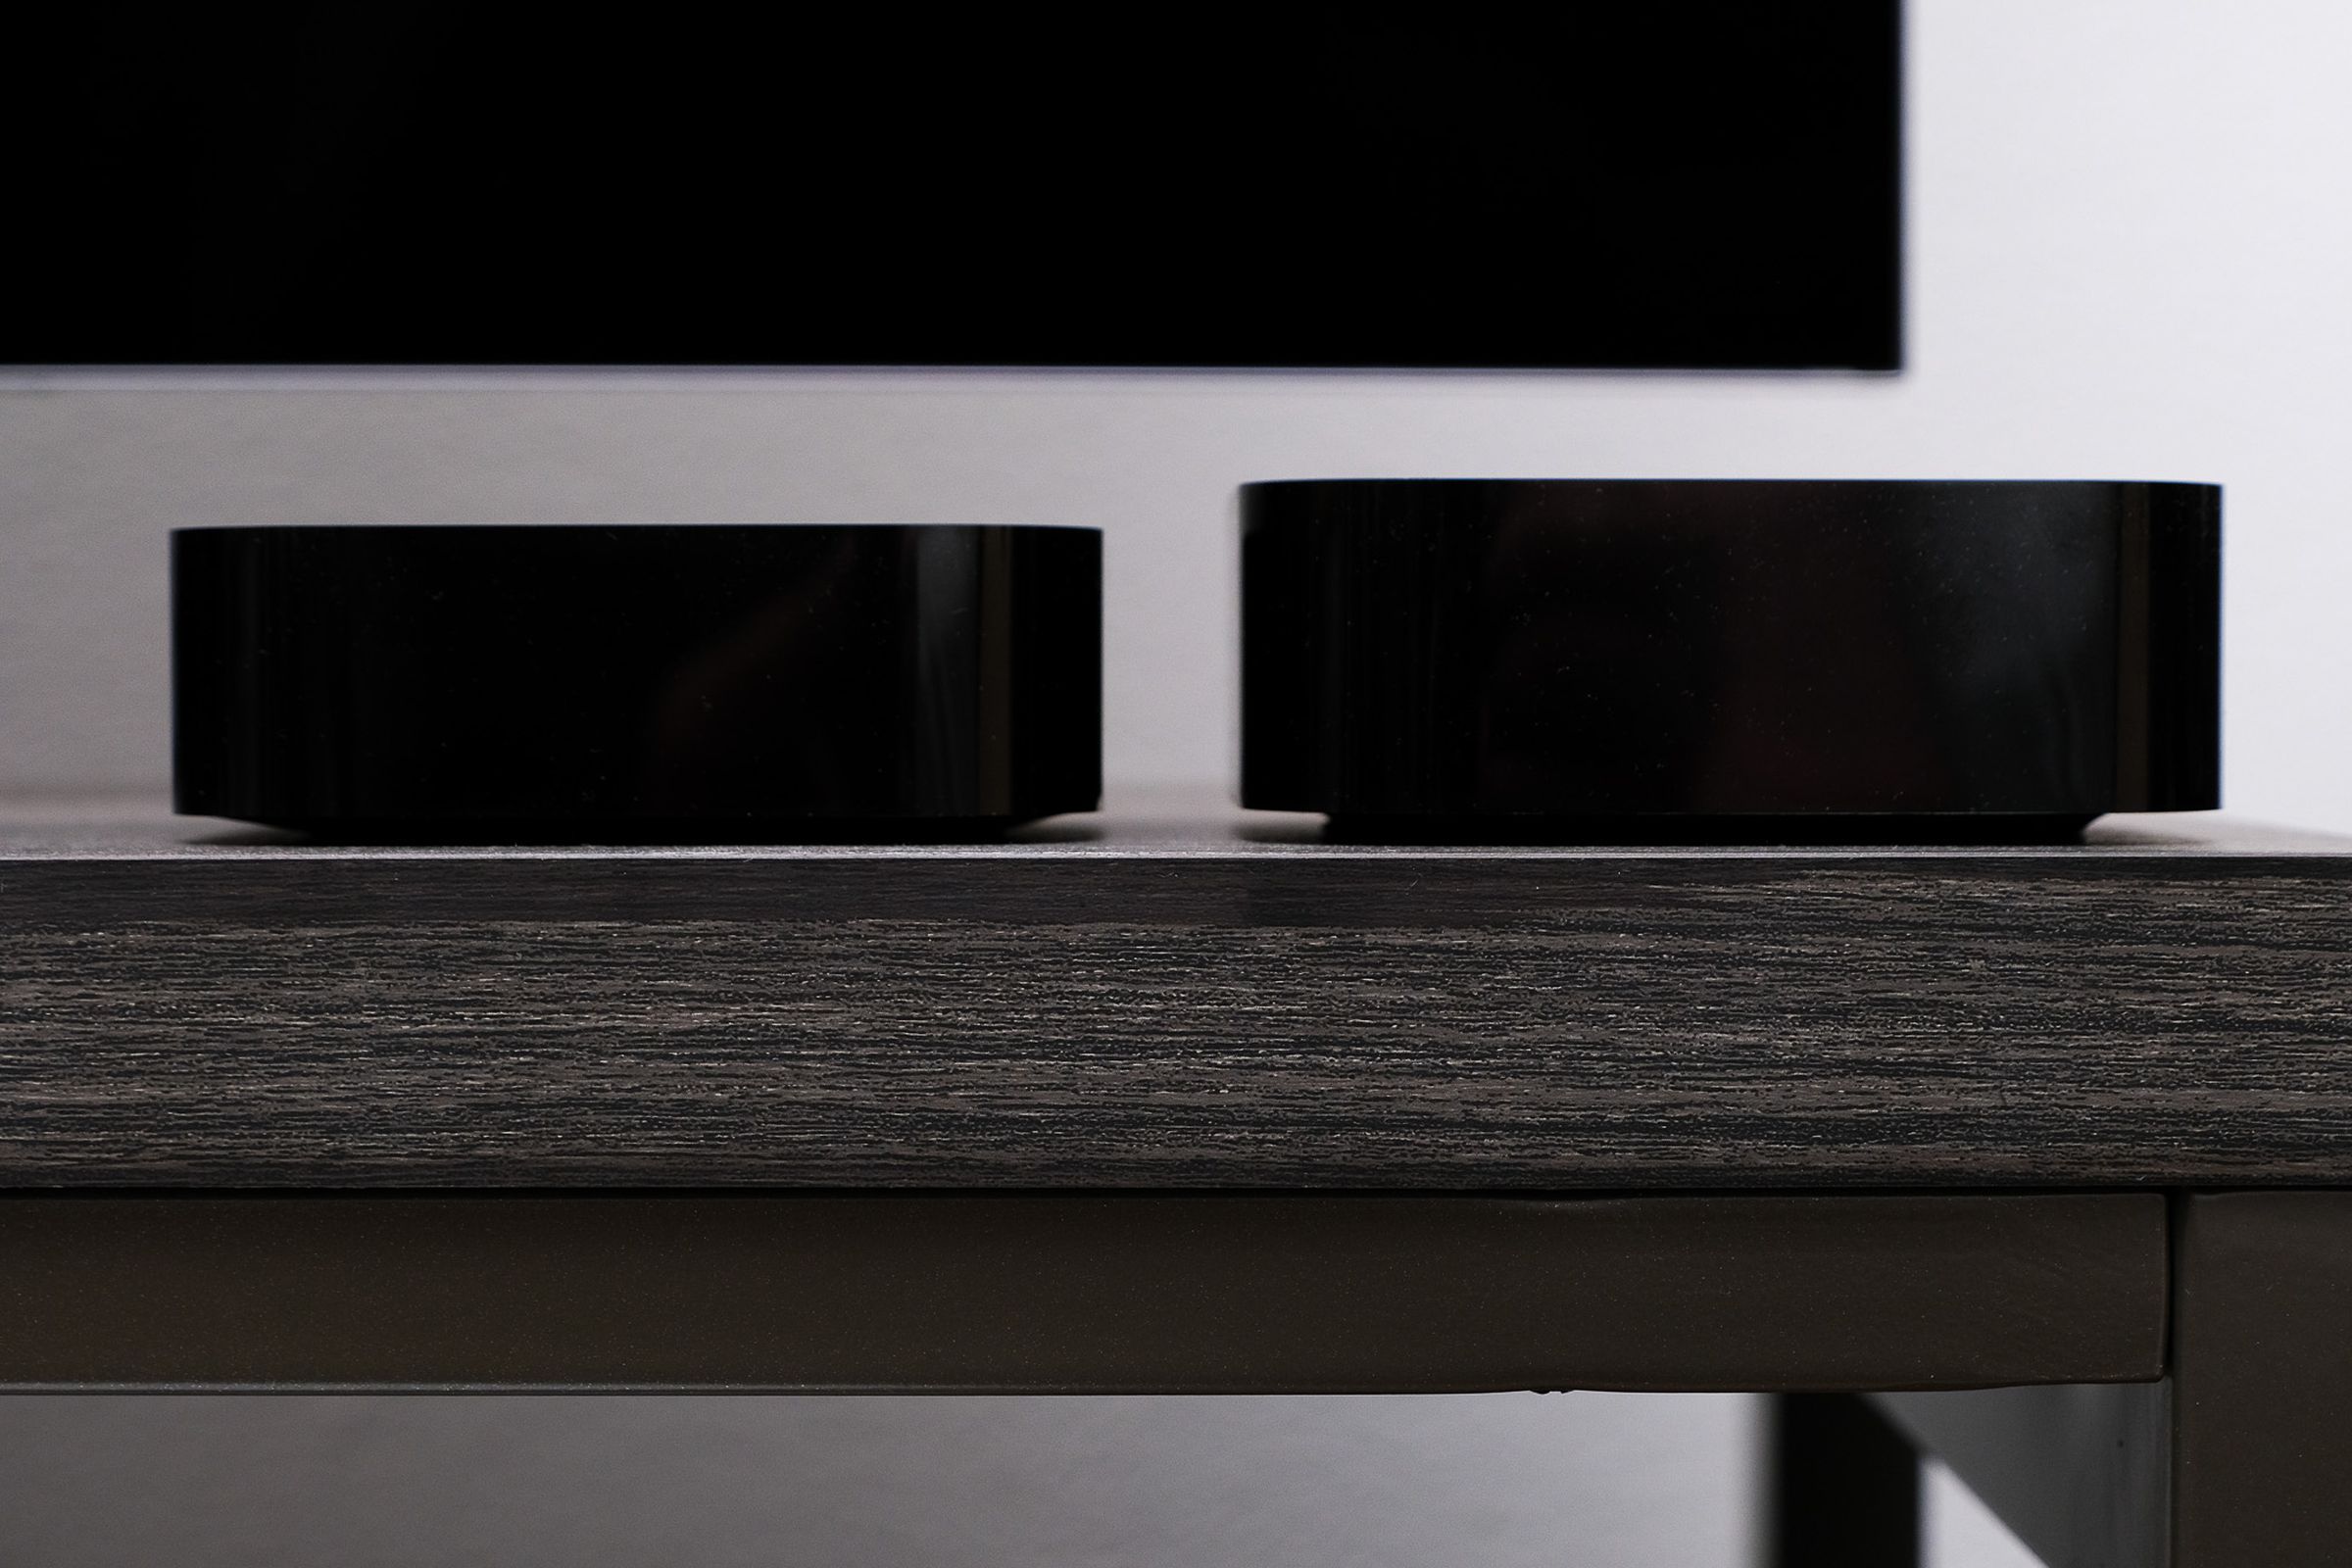 A photo comparing the height of the second-gen and third-gen Apple TV 4K.